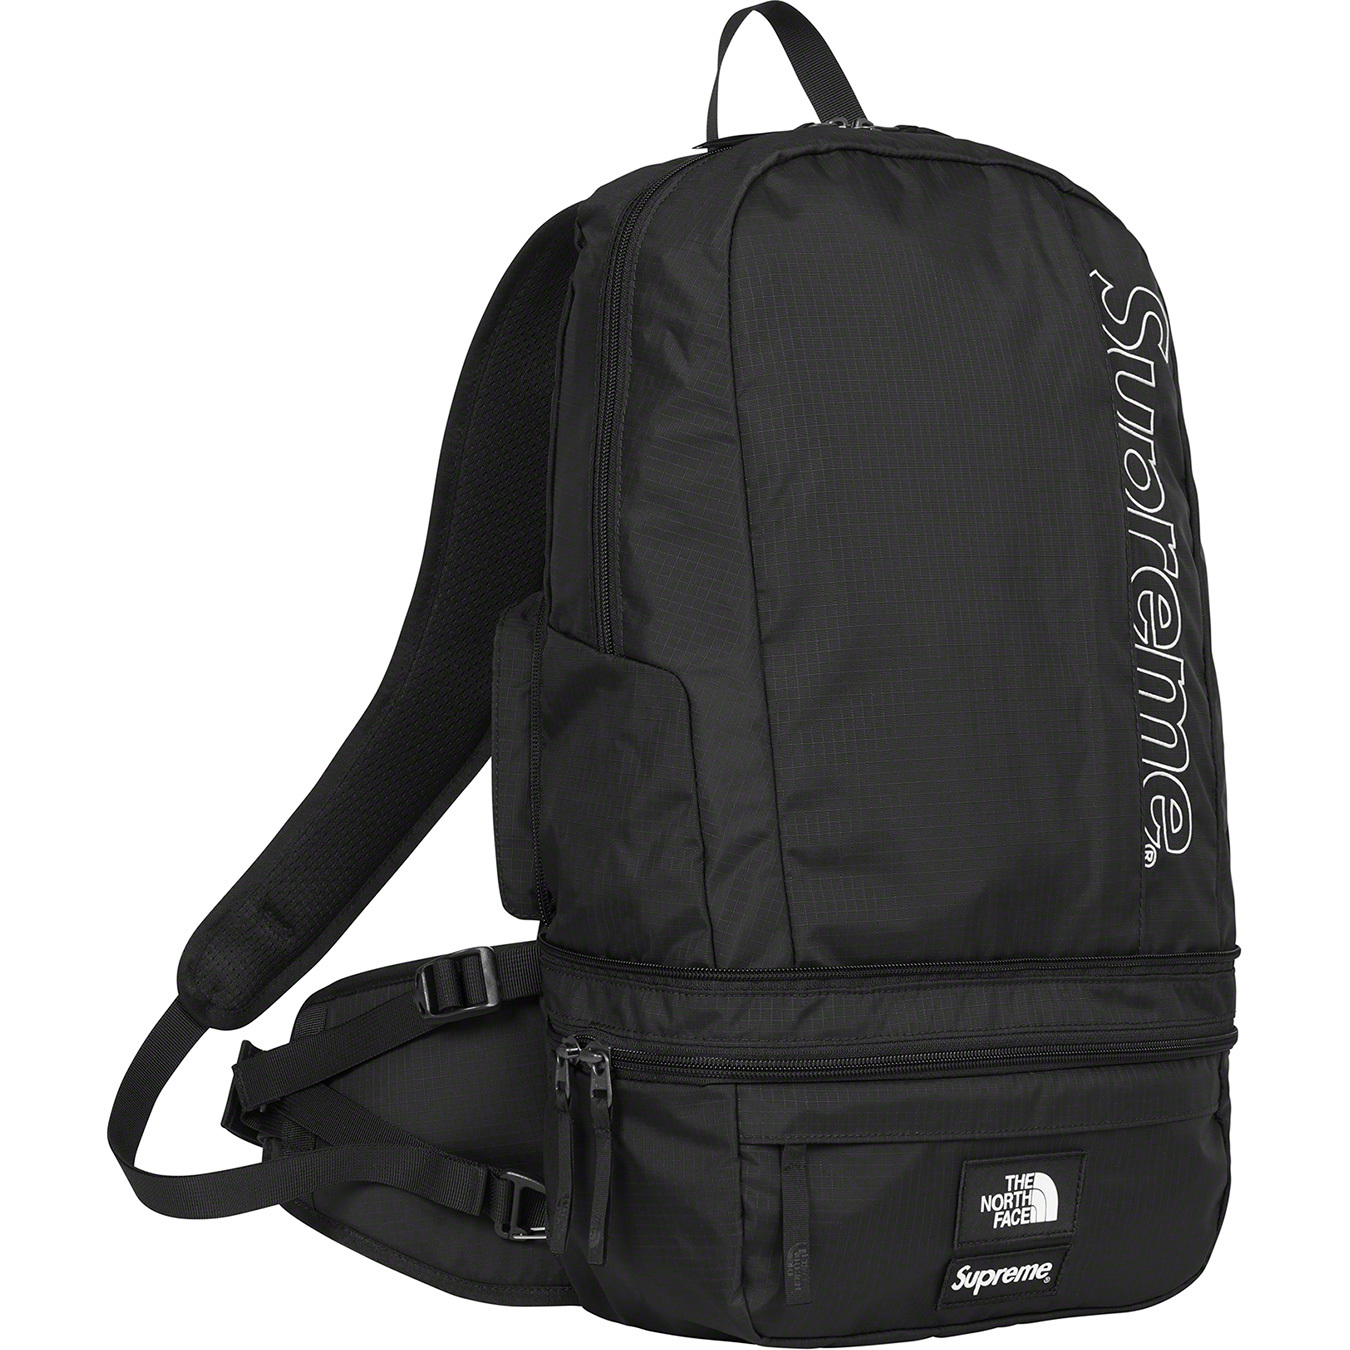 The North Face Trekking Convertible Backpack + Waist Bag - spring 